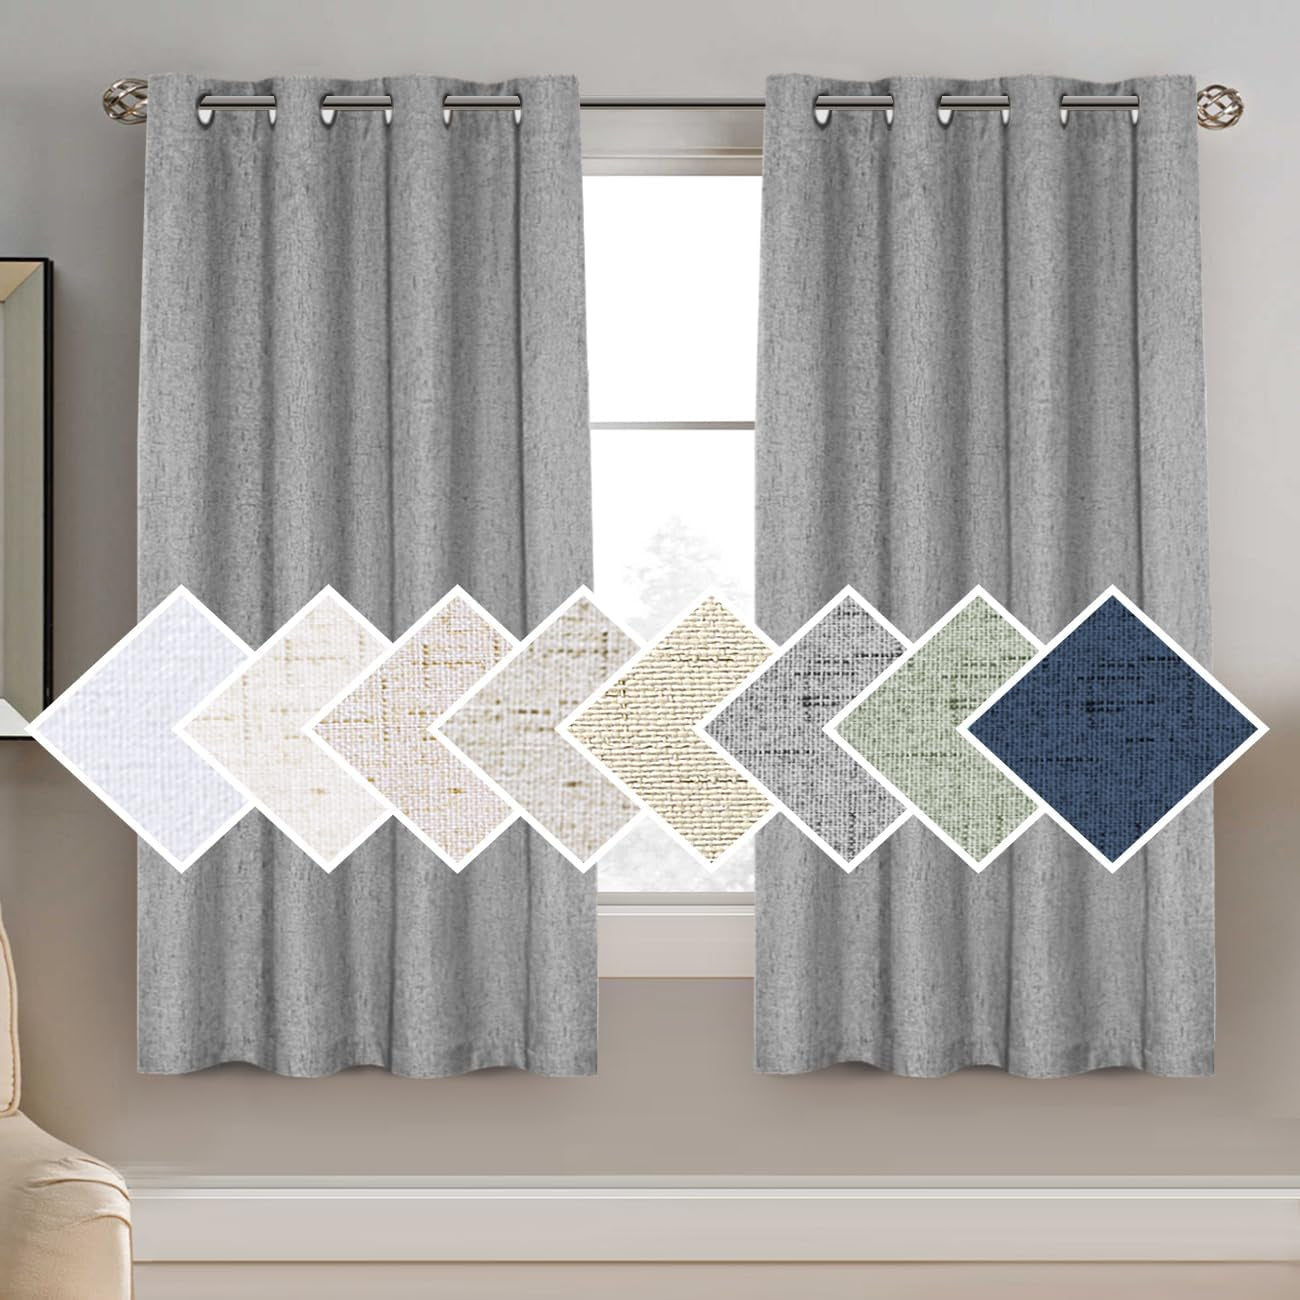 H.VERSAILTEX 100% Blackout Curtains for Bedroom Thermal Insulated Linen Textured Curtains Heat and Full Light Blocking Drapes Living Room Curtains 2 Panel Sets, 52X84 - Inch, Natural  H.VERSAILTEX Dove 1 Panel - 52"W X 63"L 